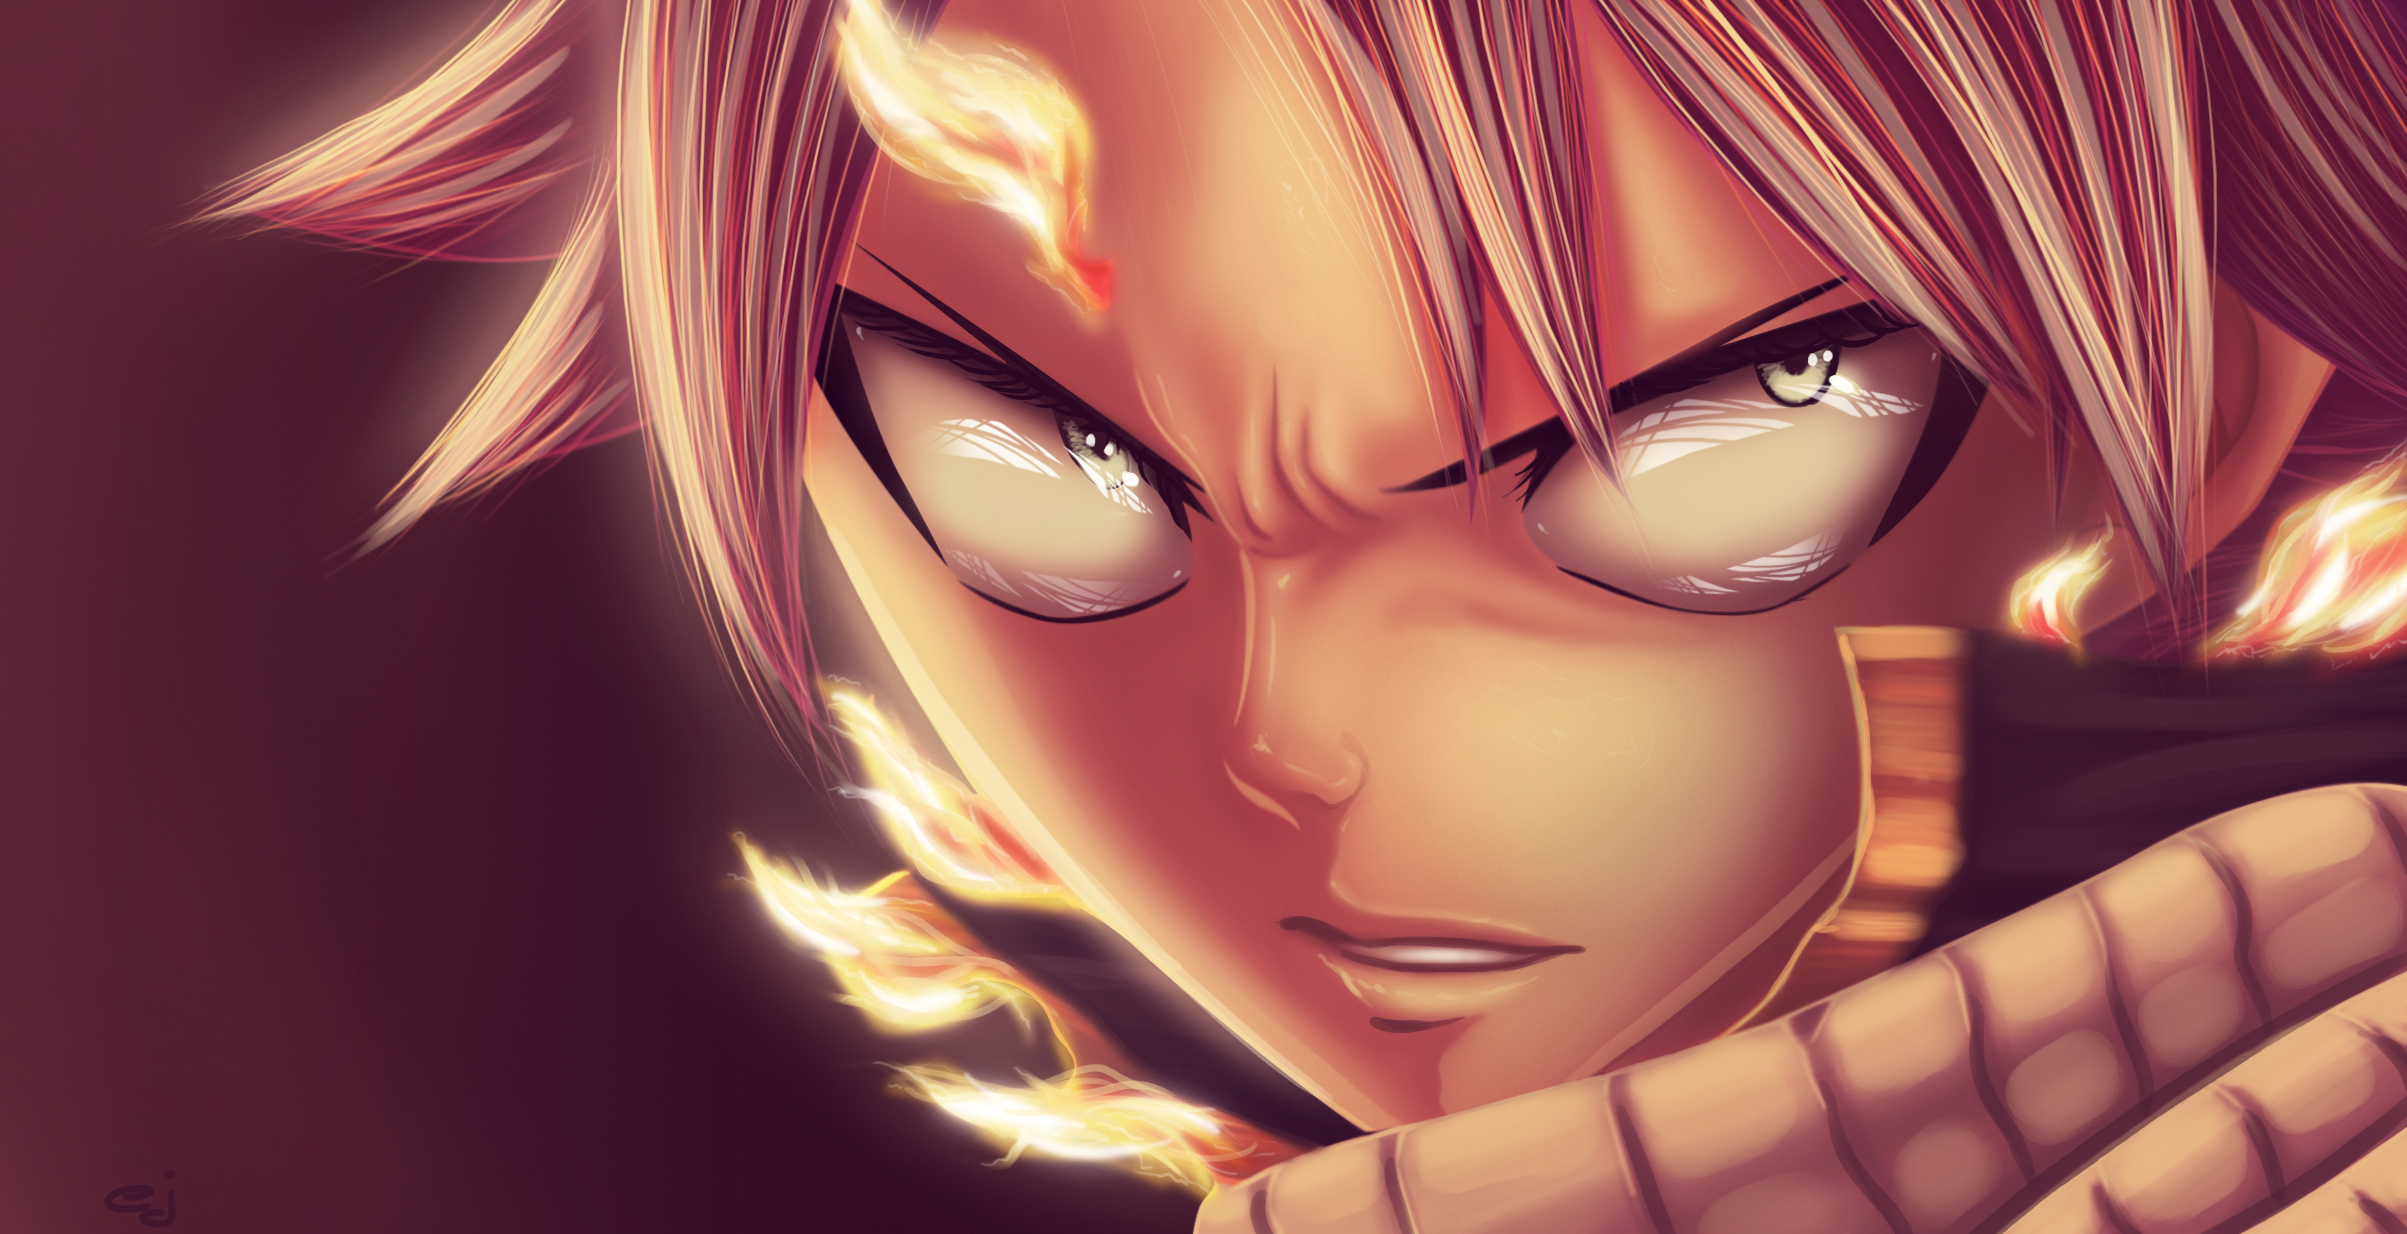 2407x1234 670+ Natsu Dragneel HD Wallpapers and Backgrounds